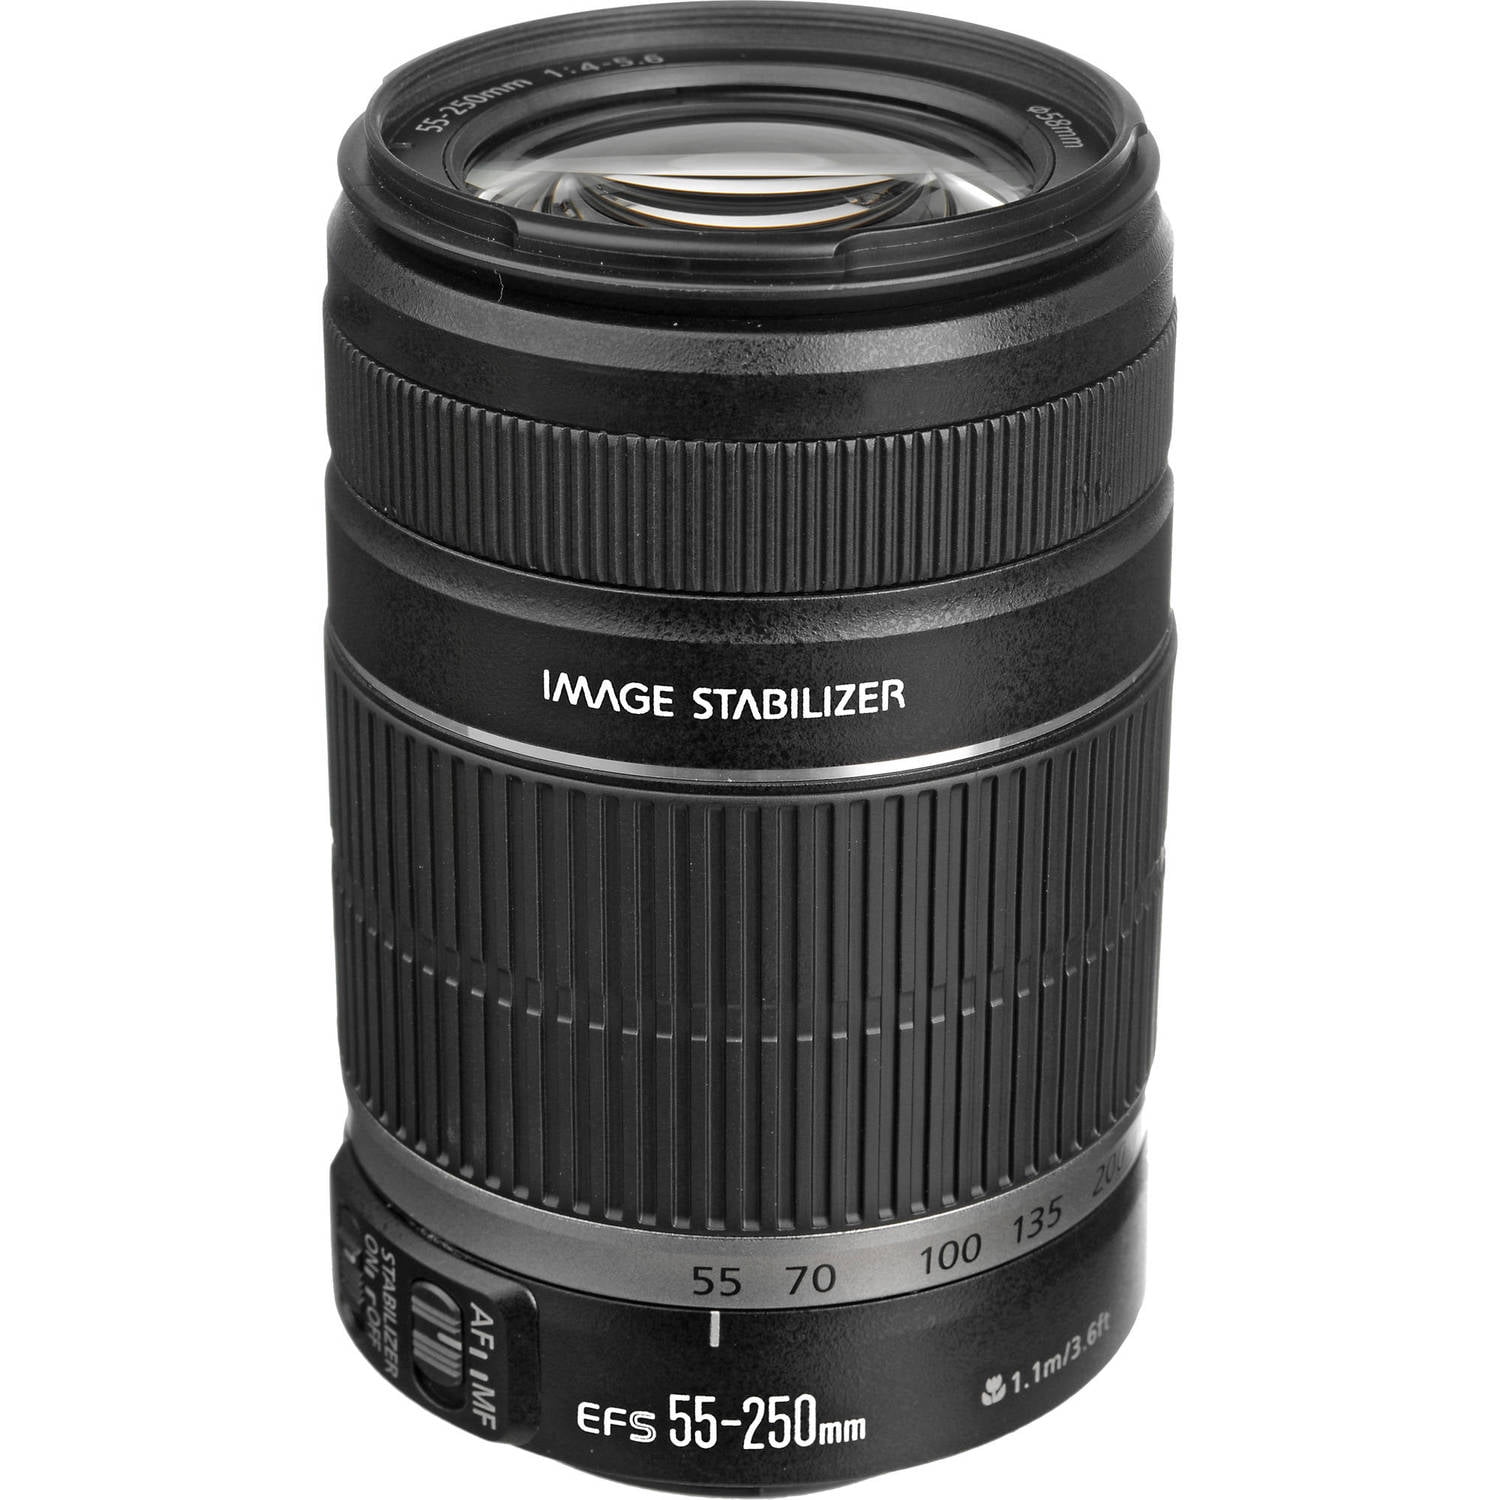 Canon EF-S 55-250mm f/4-5.6 is Image Stabilizer Telephoto Zoom Lens No Warranty International Version 